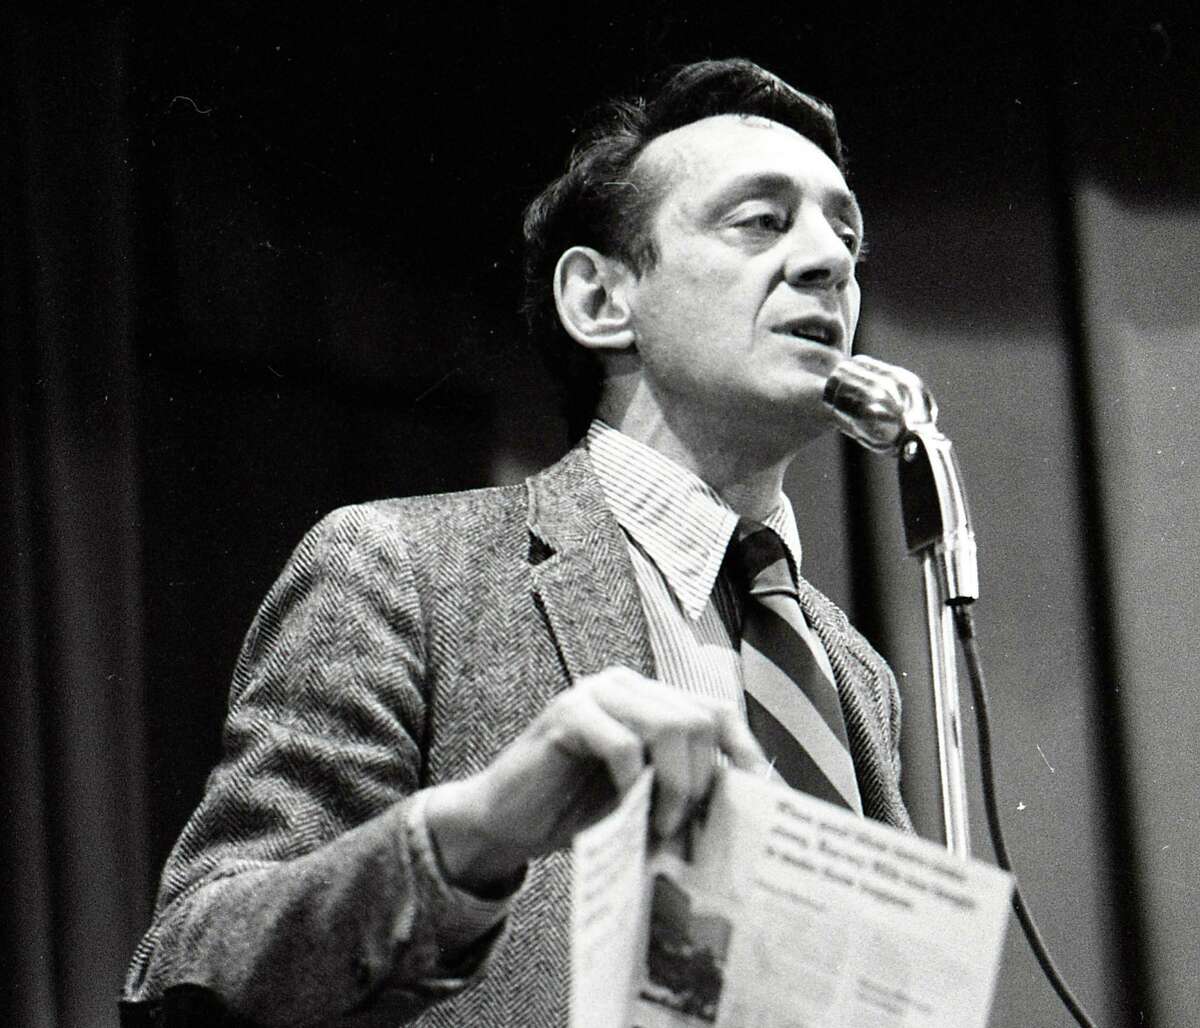 In a 1978 interview, Harvey Milk touched on a subject as contentious then as it is now: cars and public transportation.